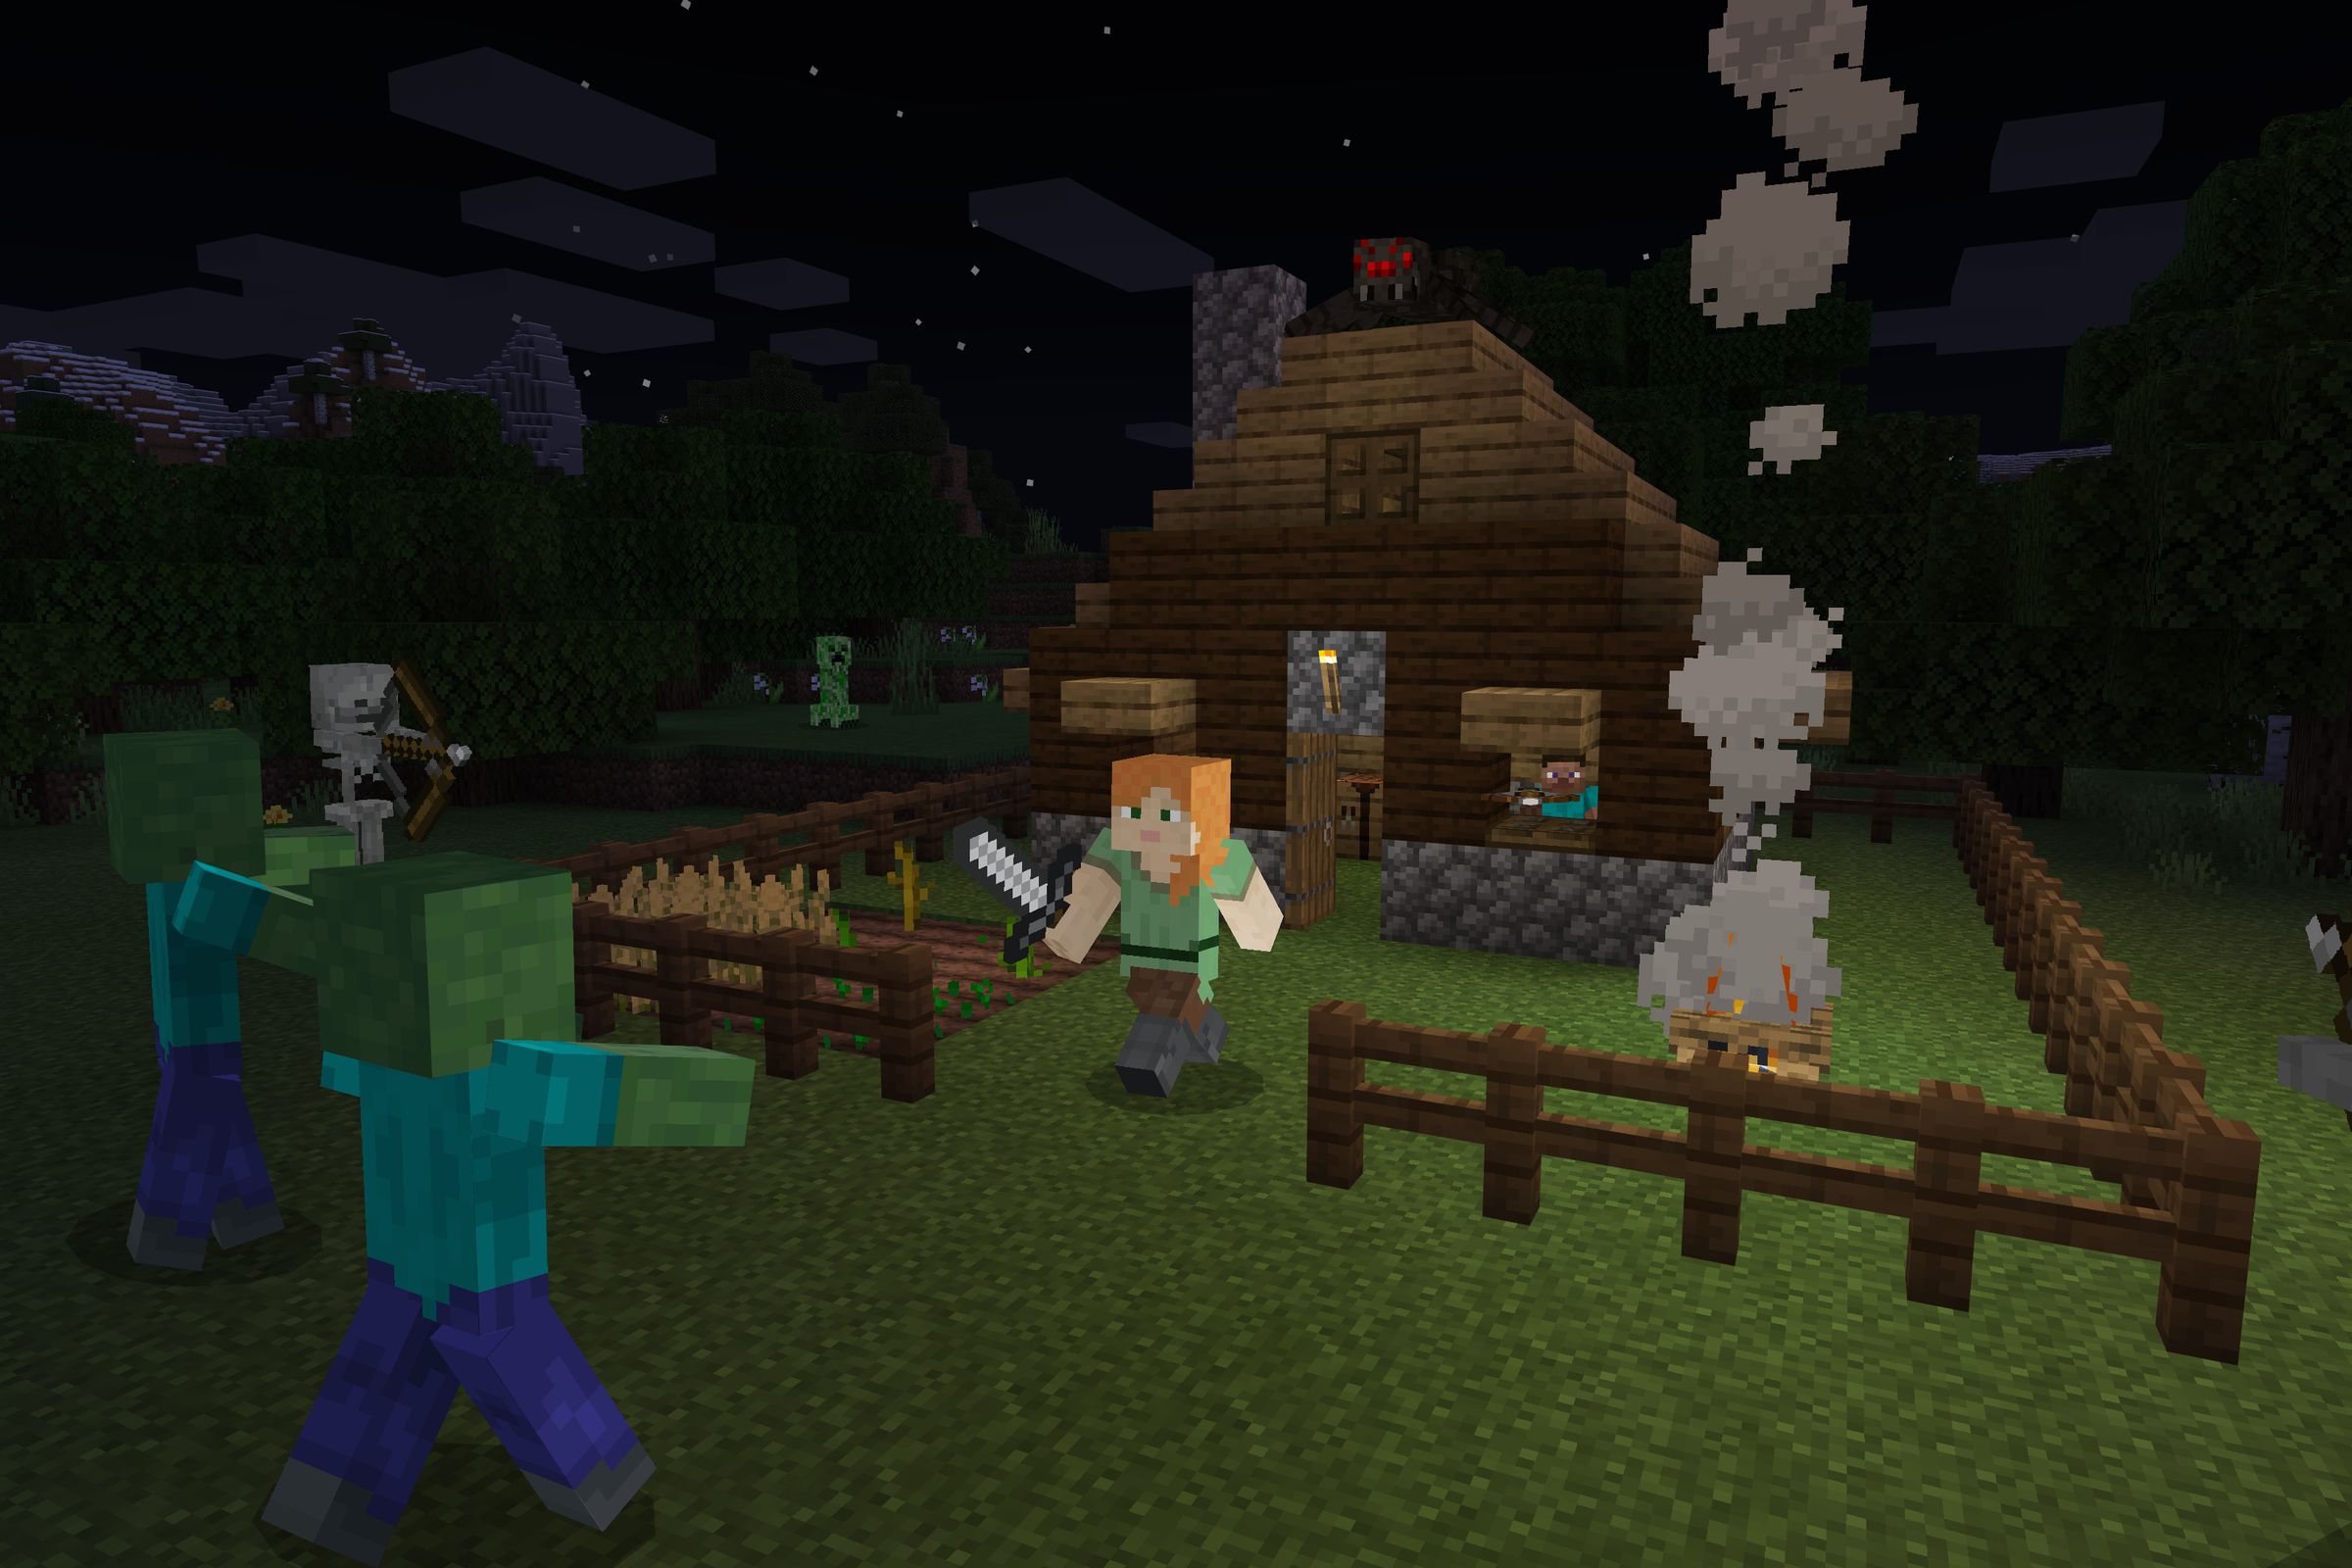 A screenshot of the video game Minecraft.